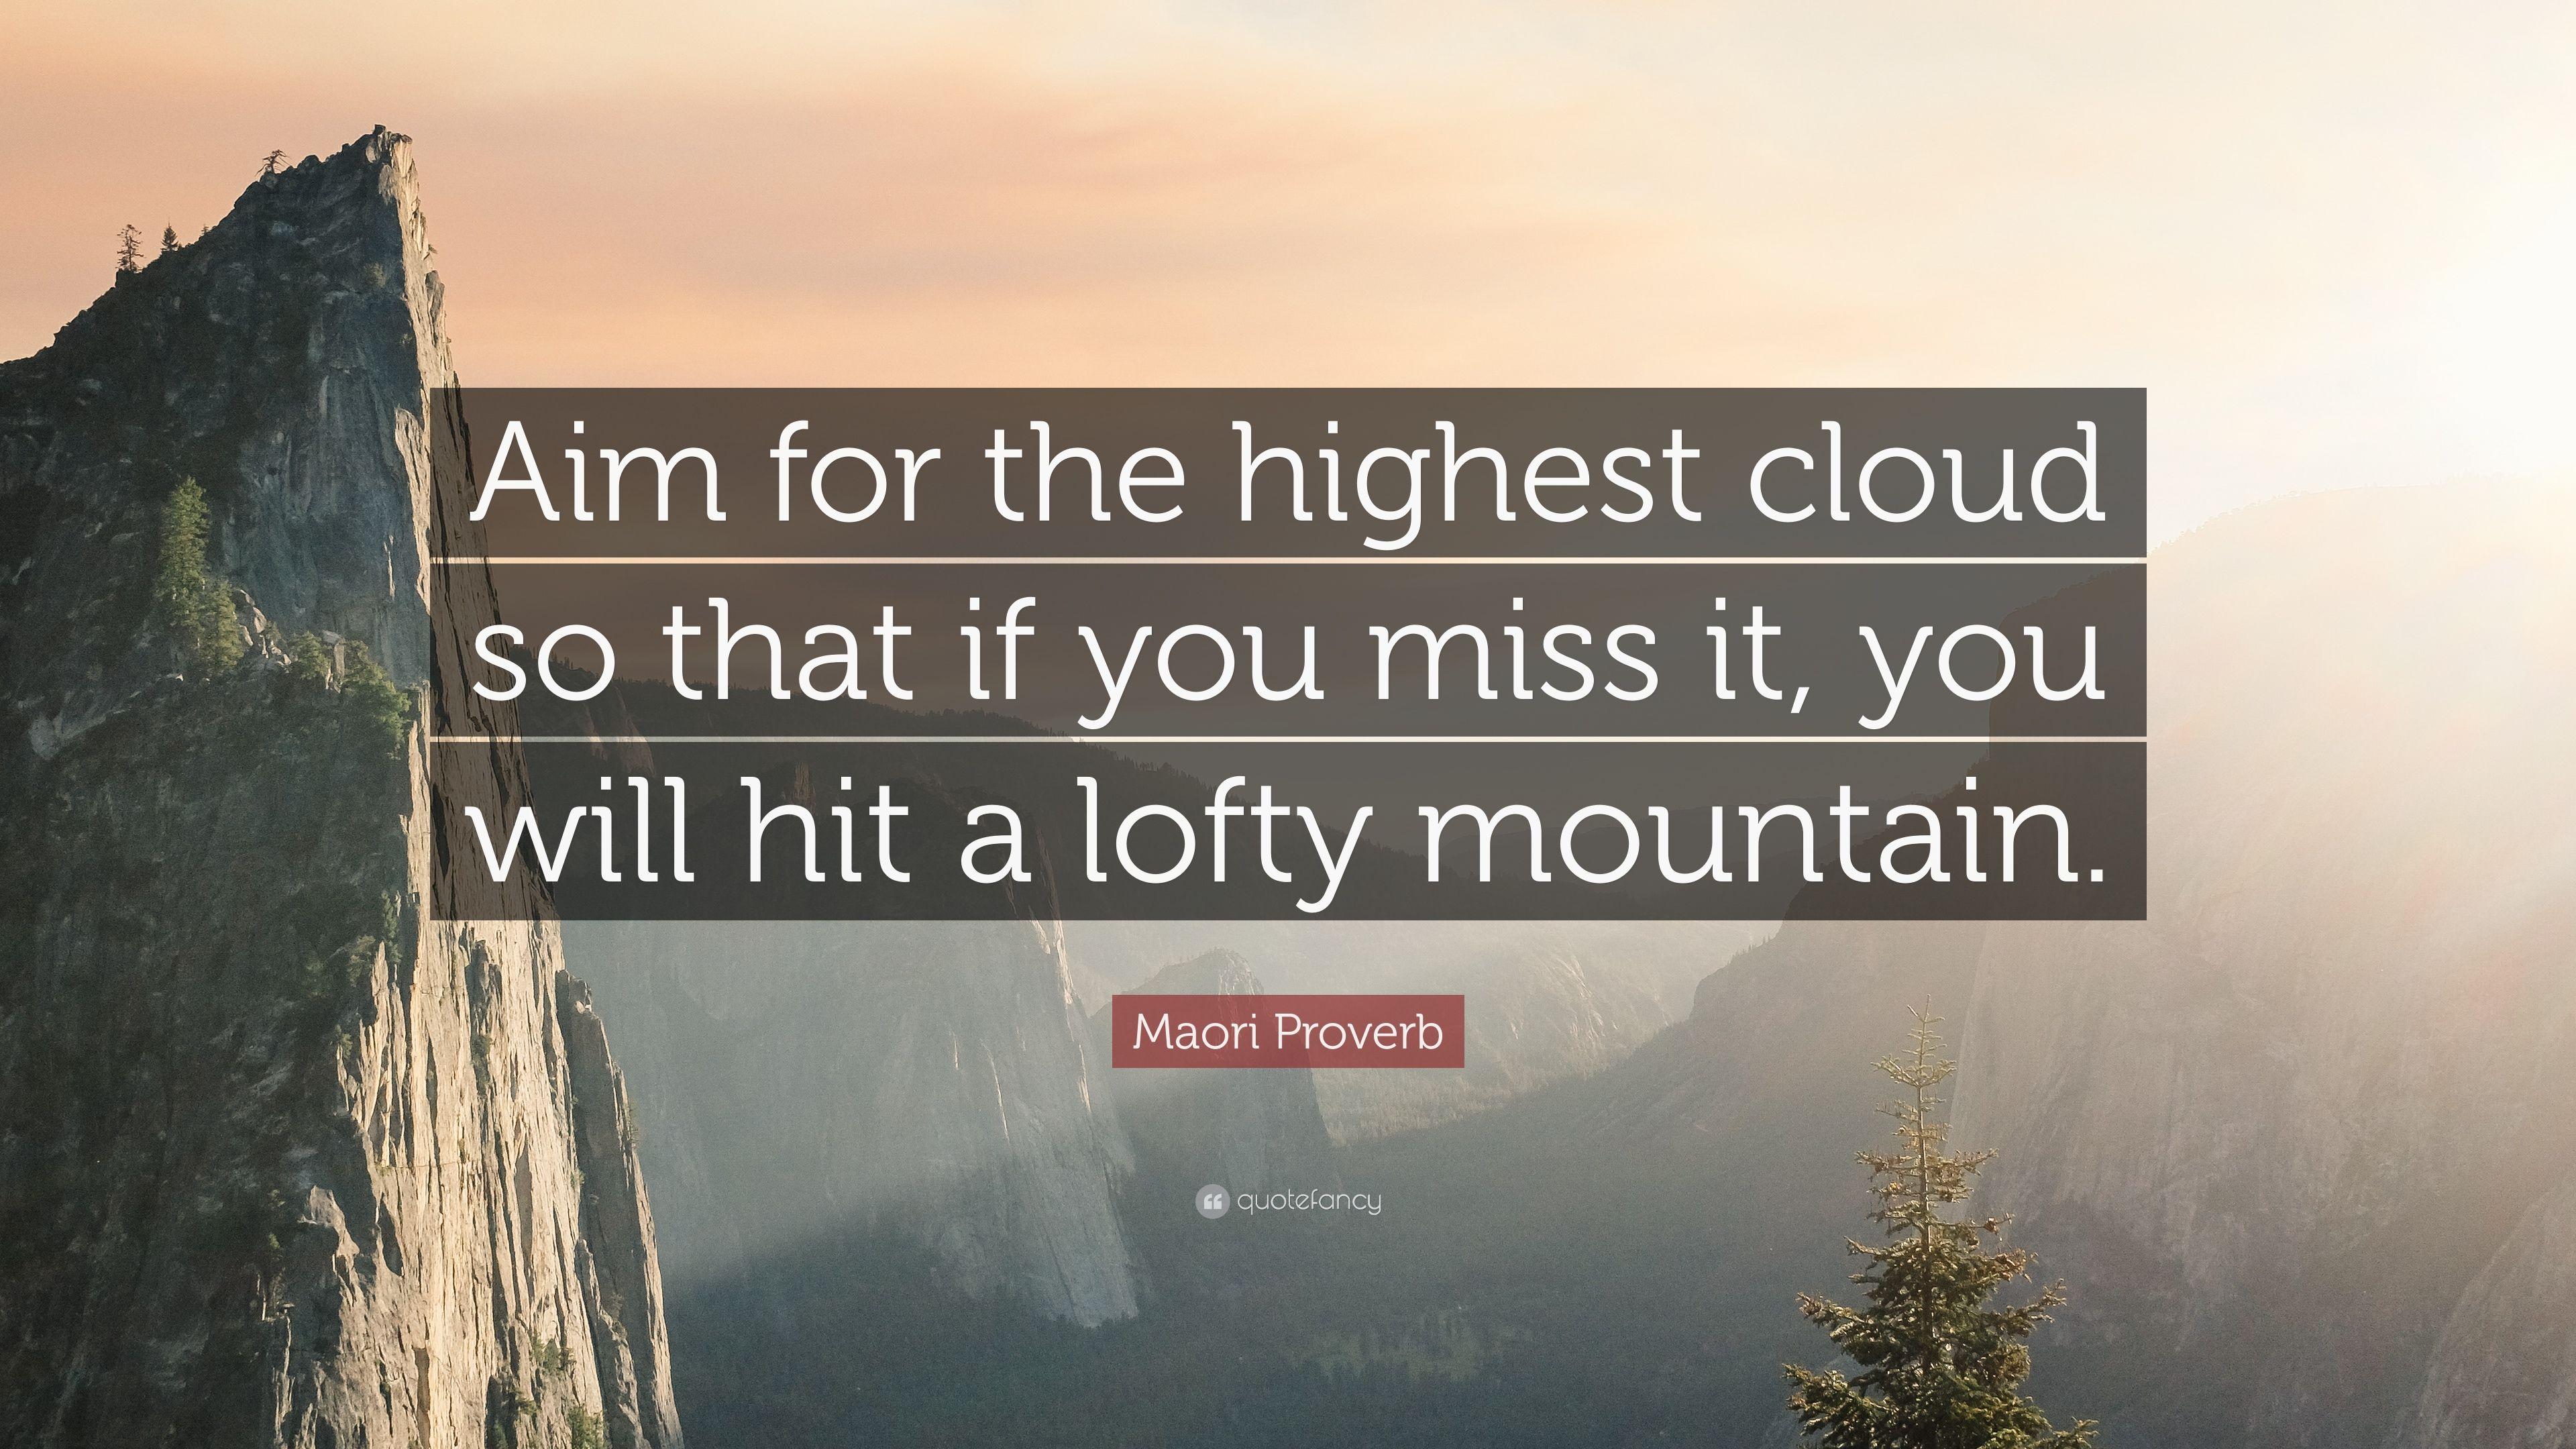 Maori Proverb Quote: “Aim for the highest cloud so that if you miss